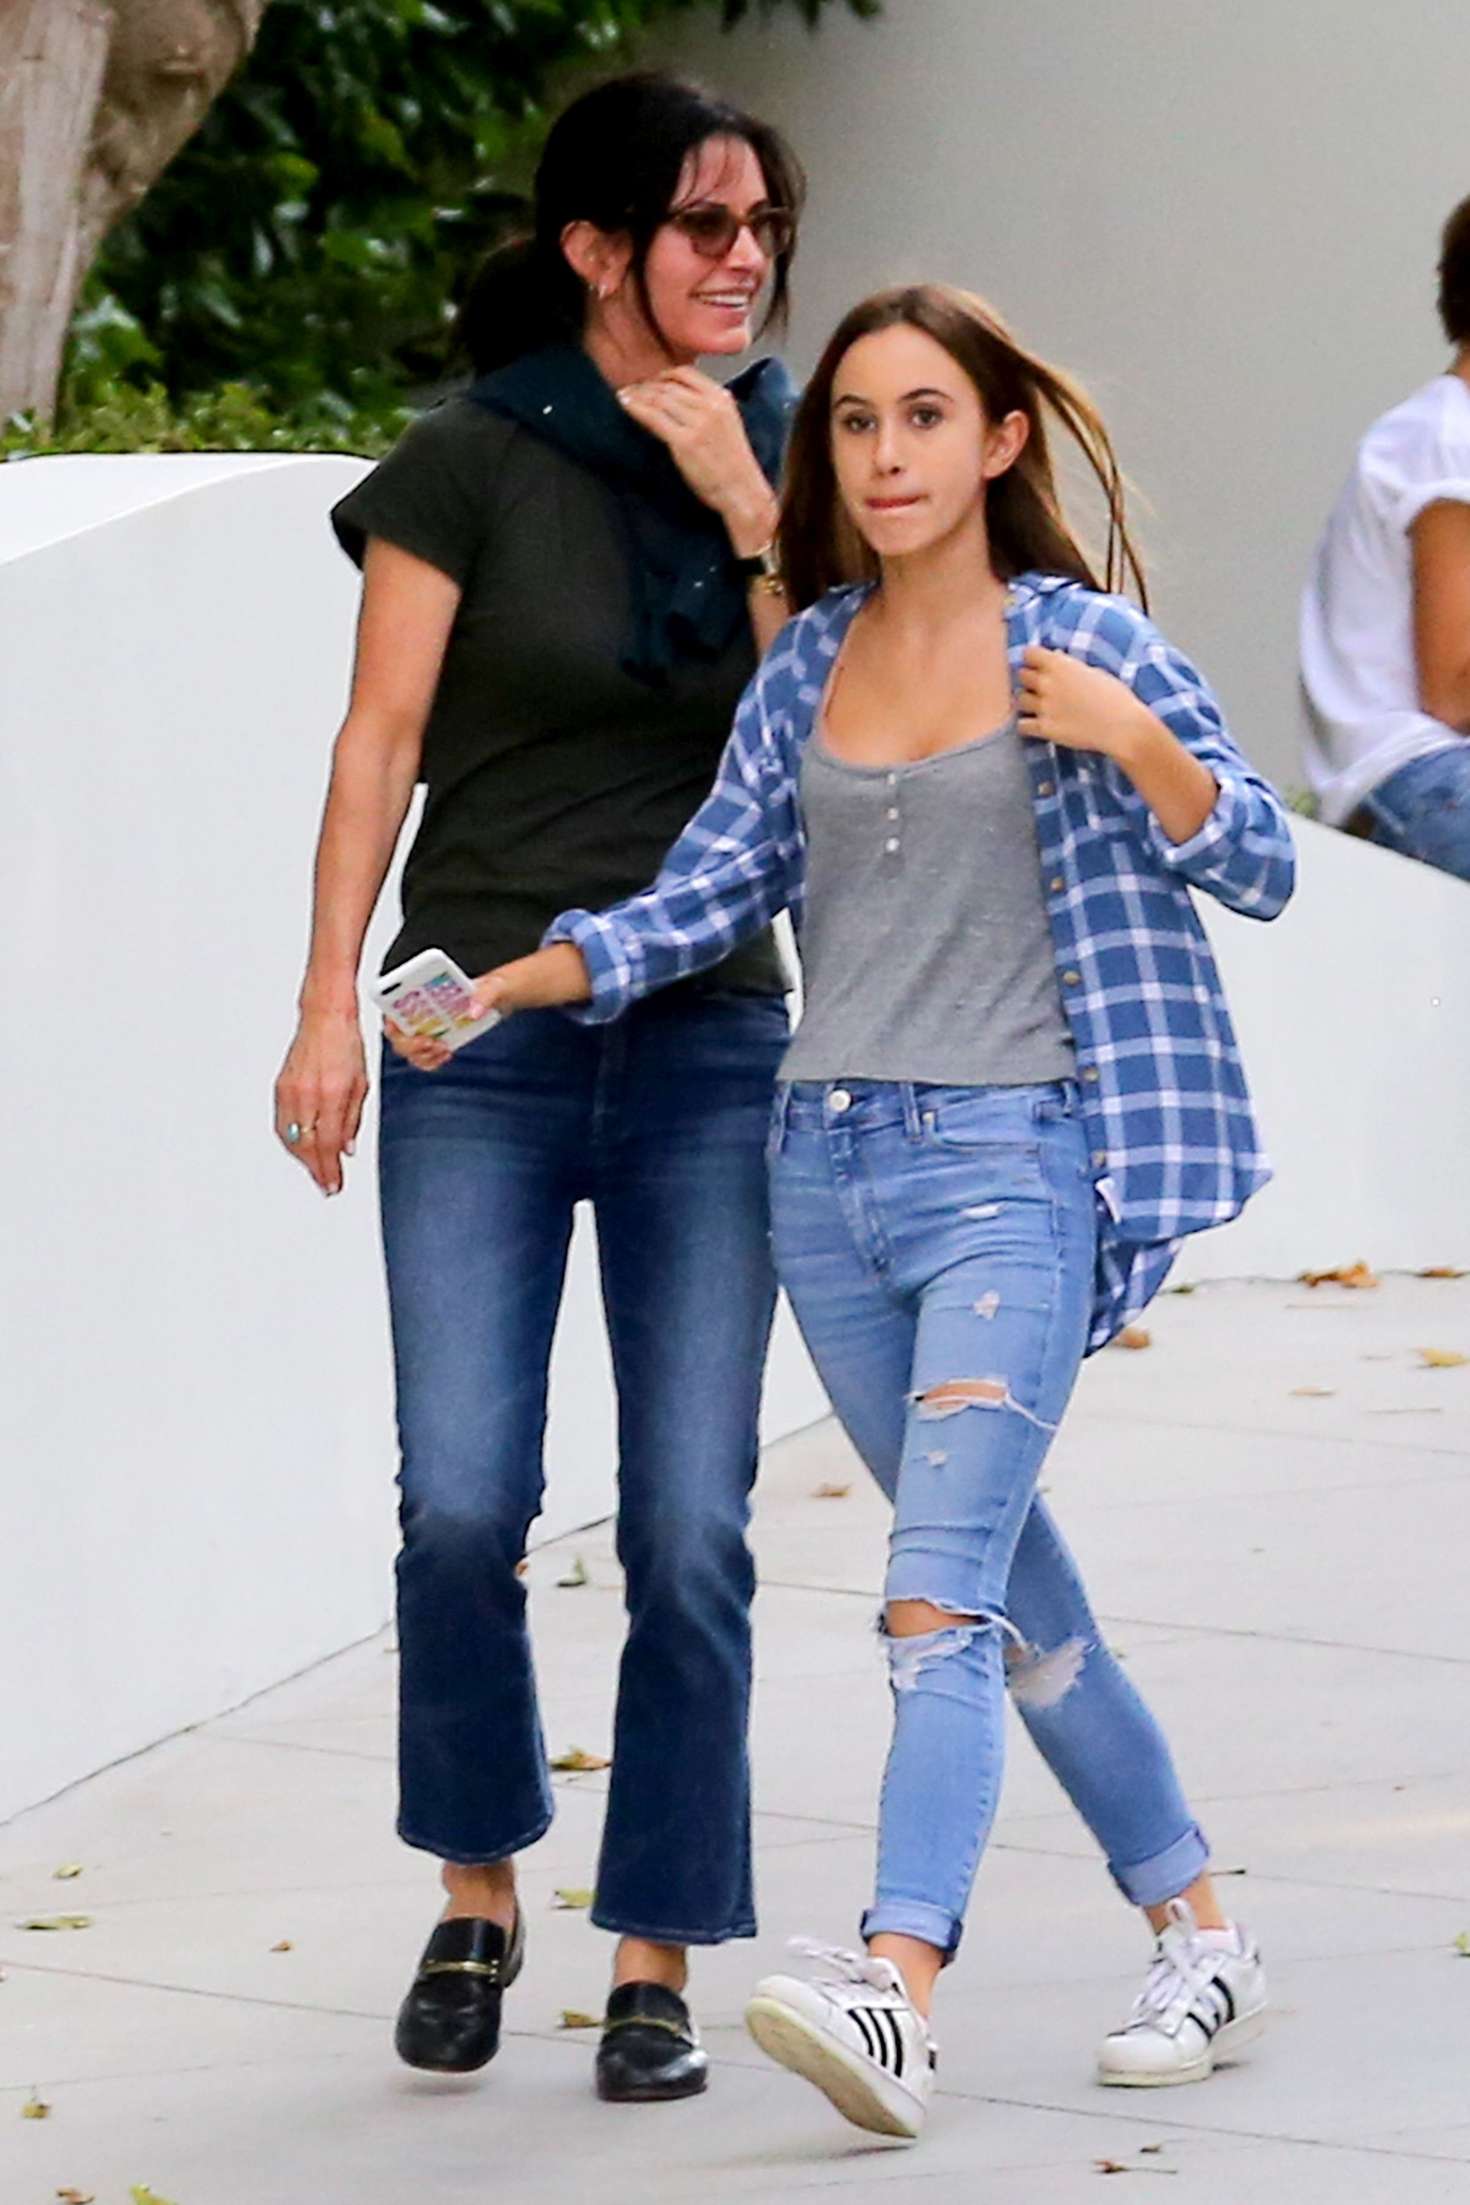 Courteney-Cox-With-Daughter-Coco-Arquette-in-Los-Angeles-